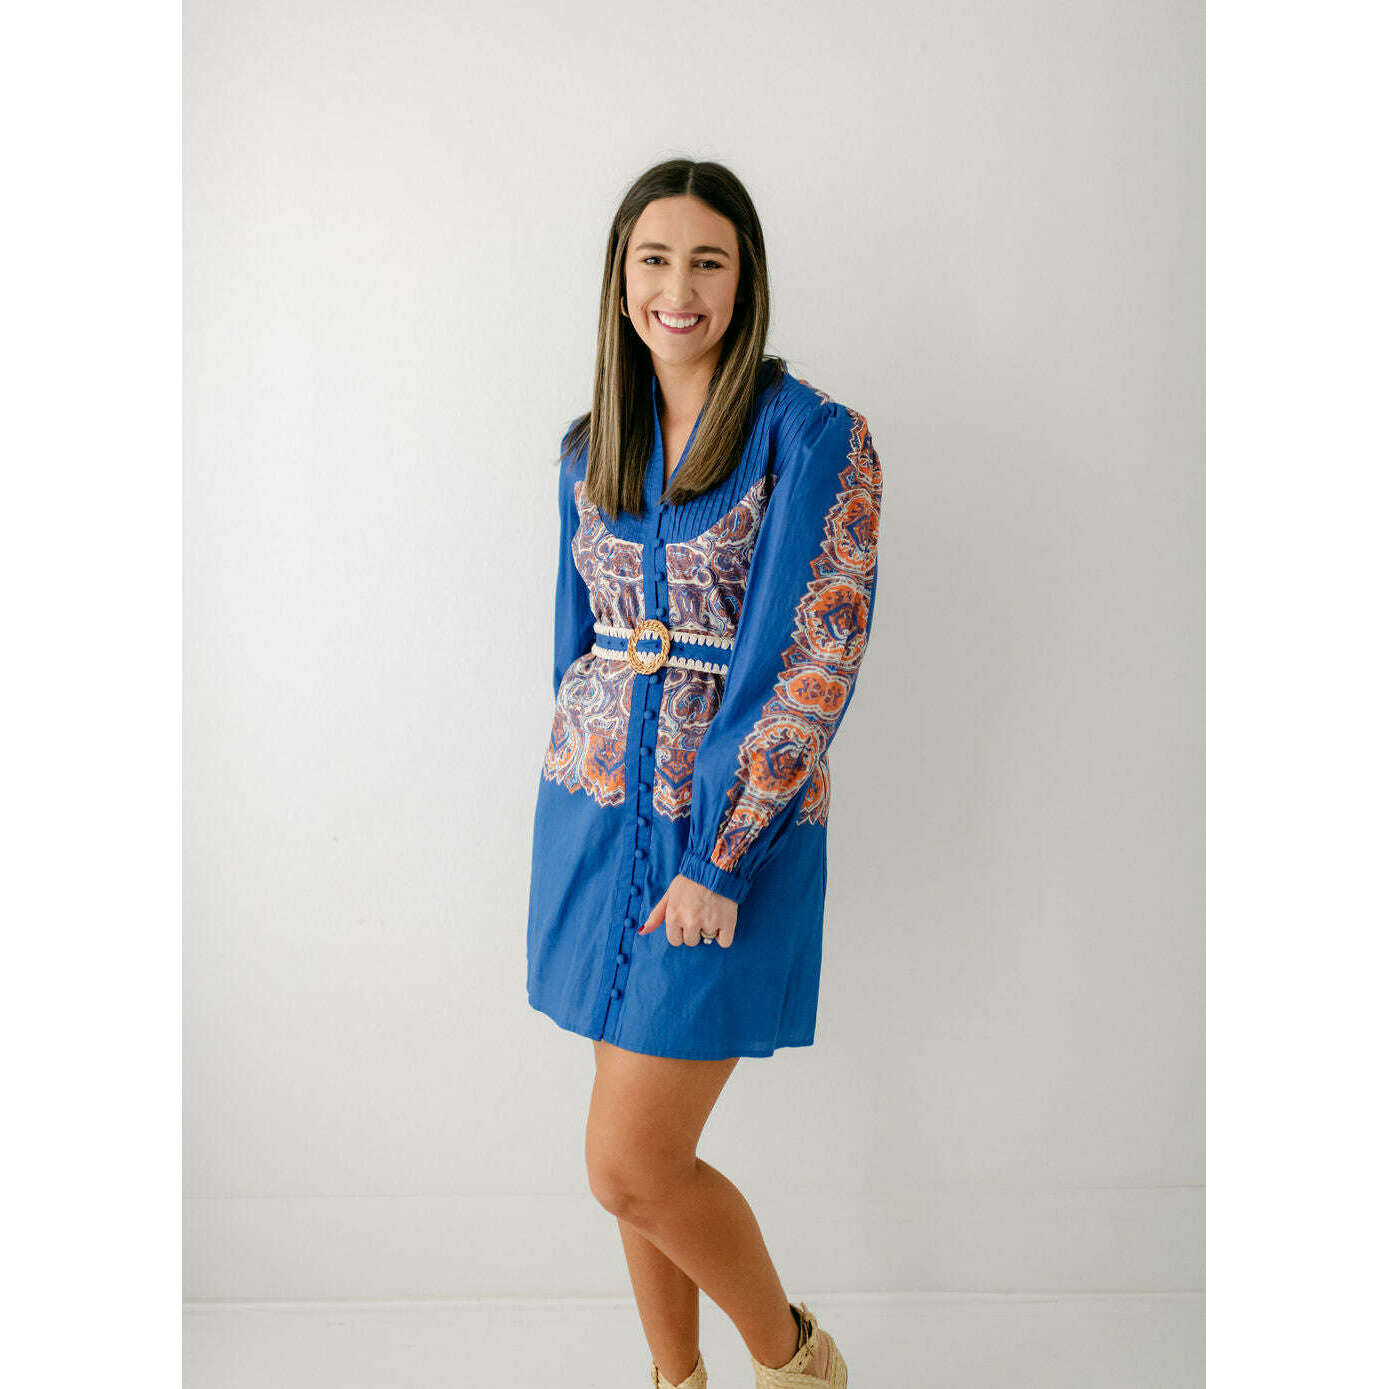 Anna Cate Collection Jenny Dress in Cobalt and Tangerine – 8.28